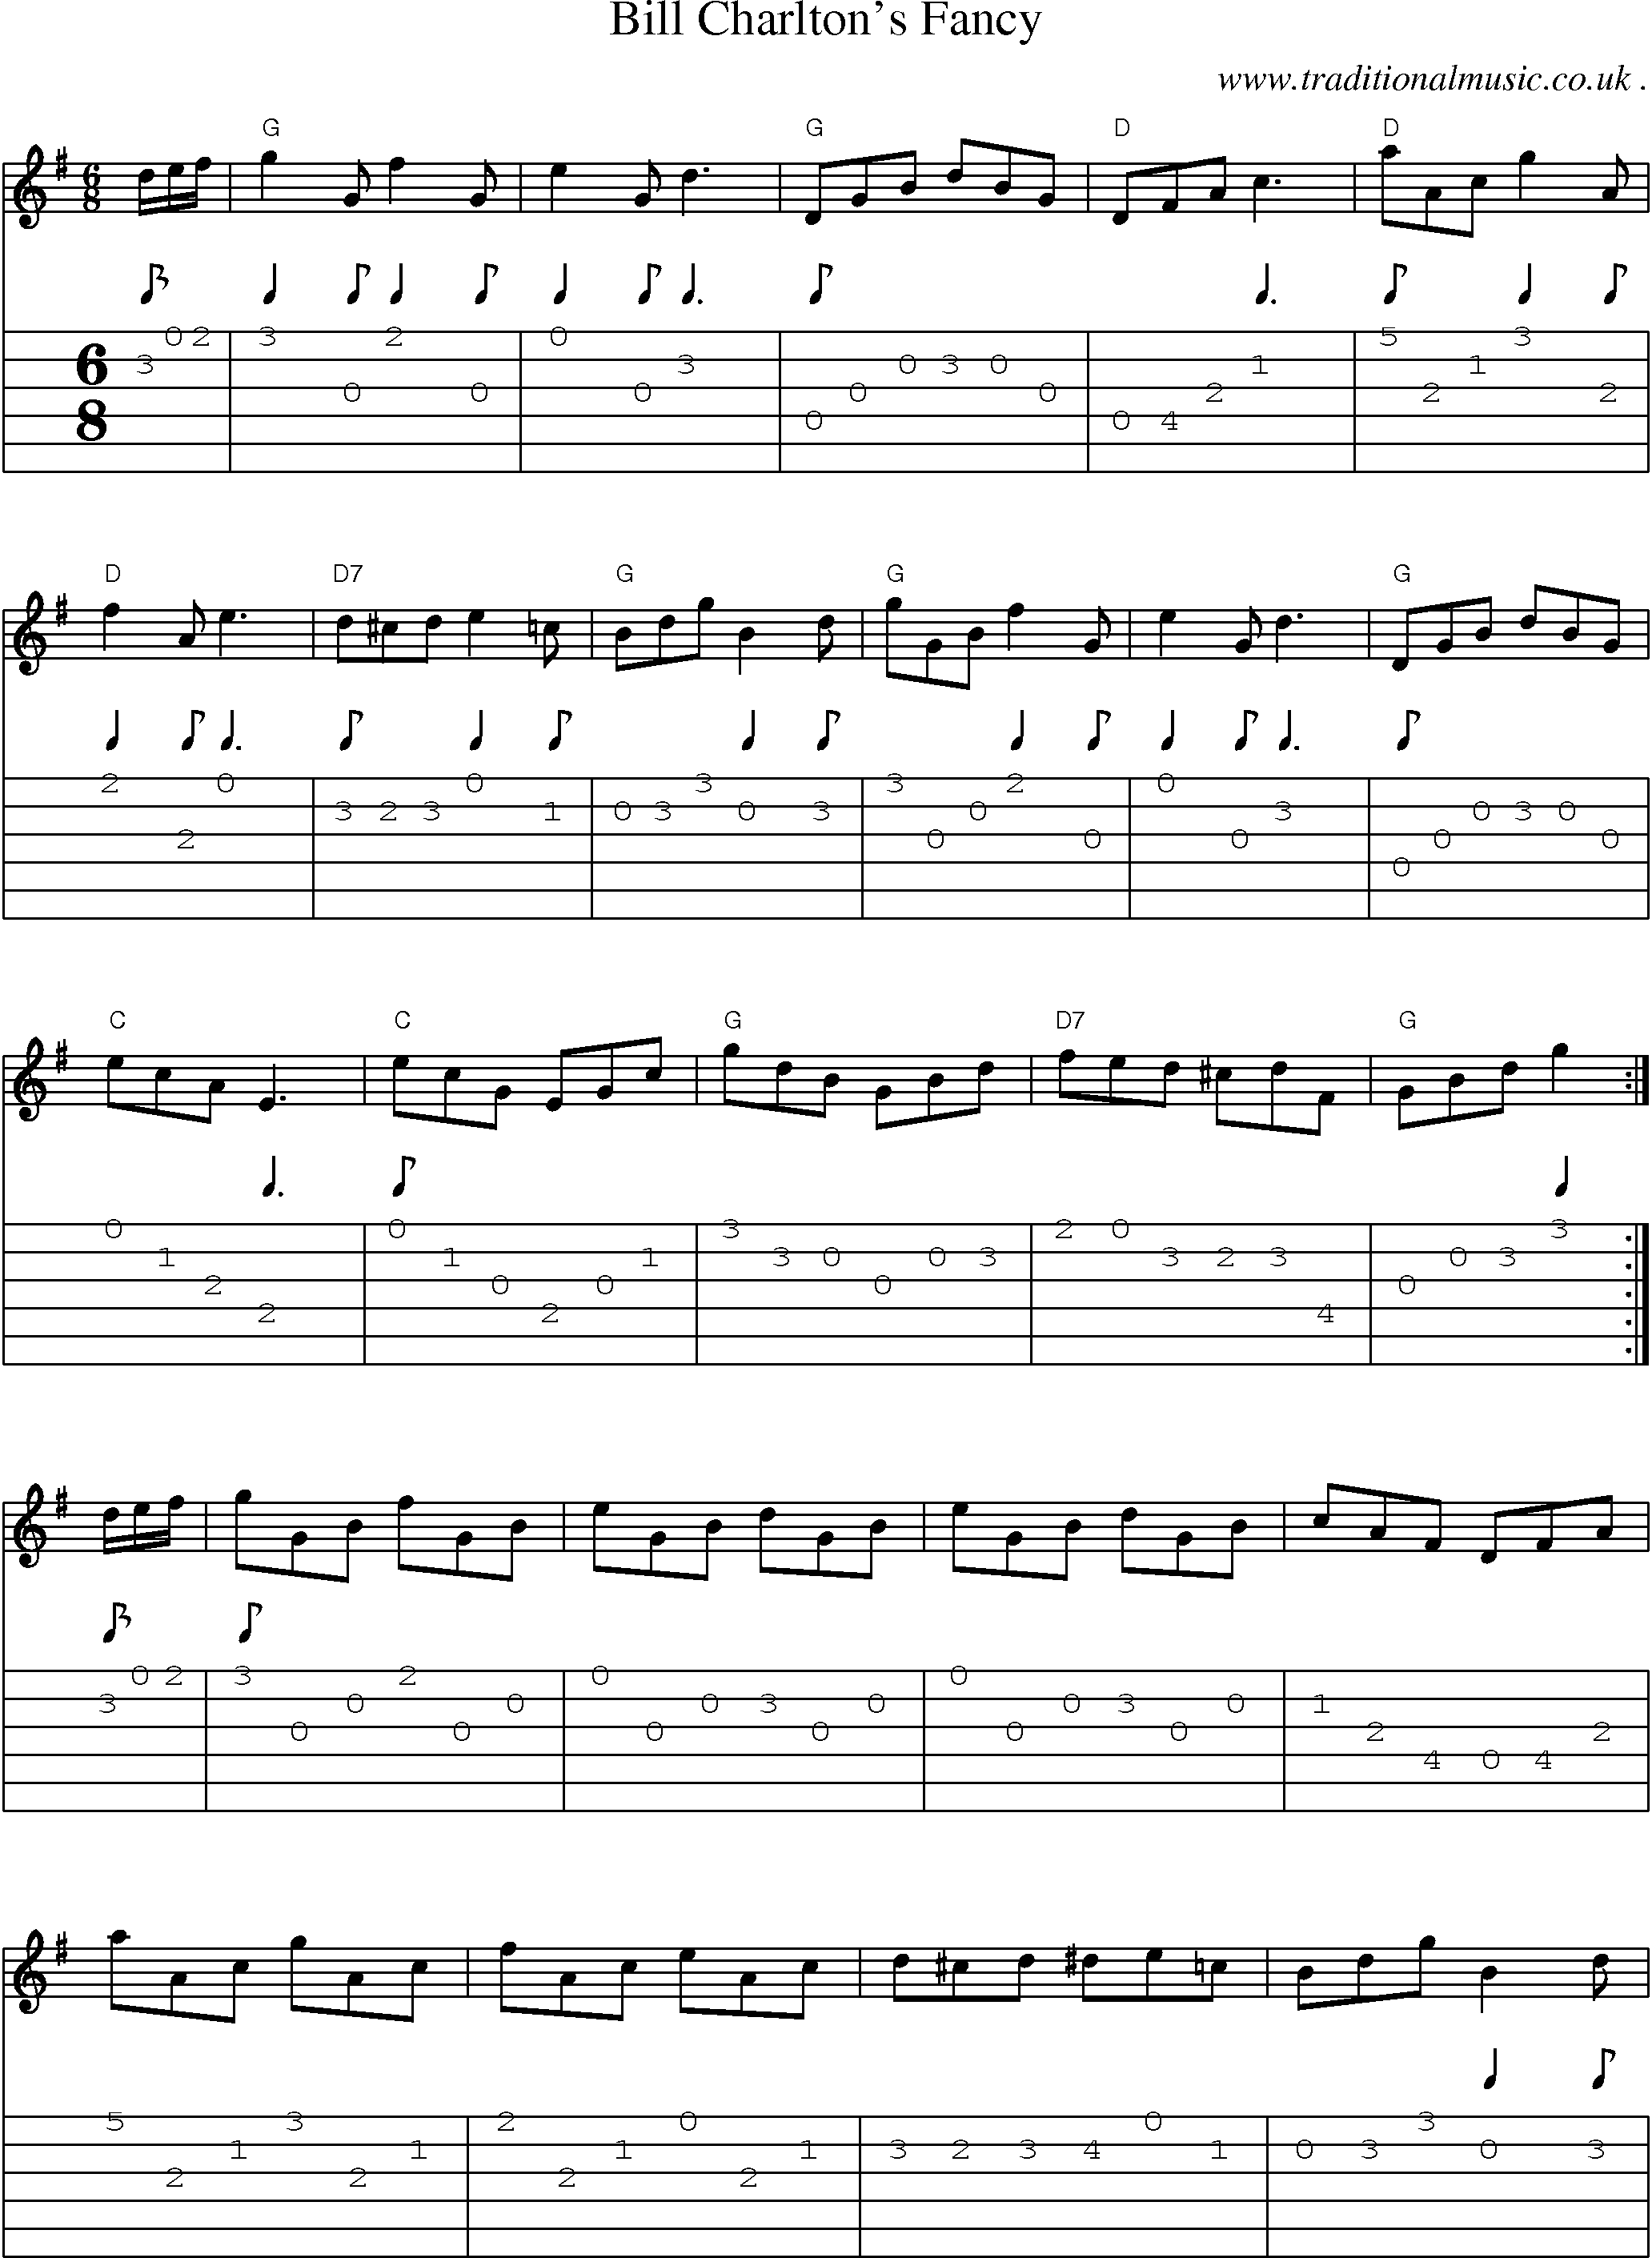 Sheet-Music and Guitar Tabs for Bill Charltons Fancy